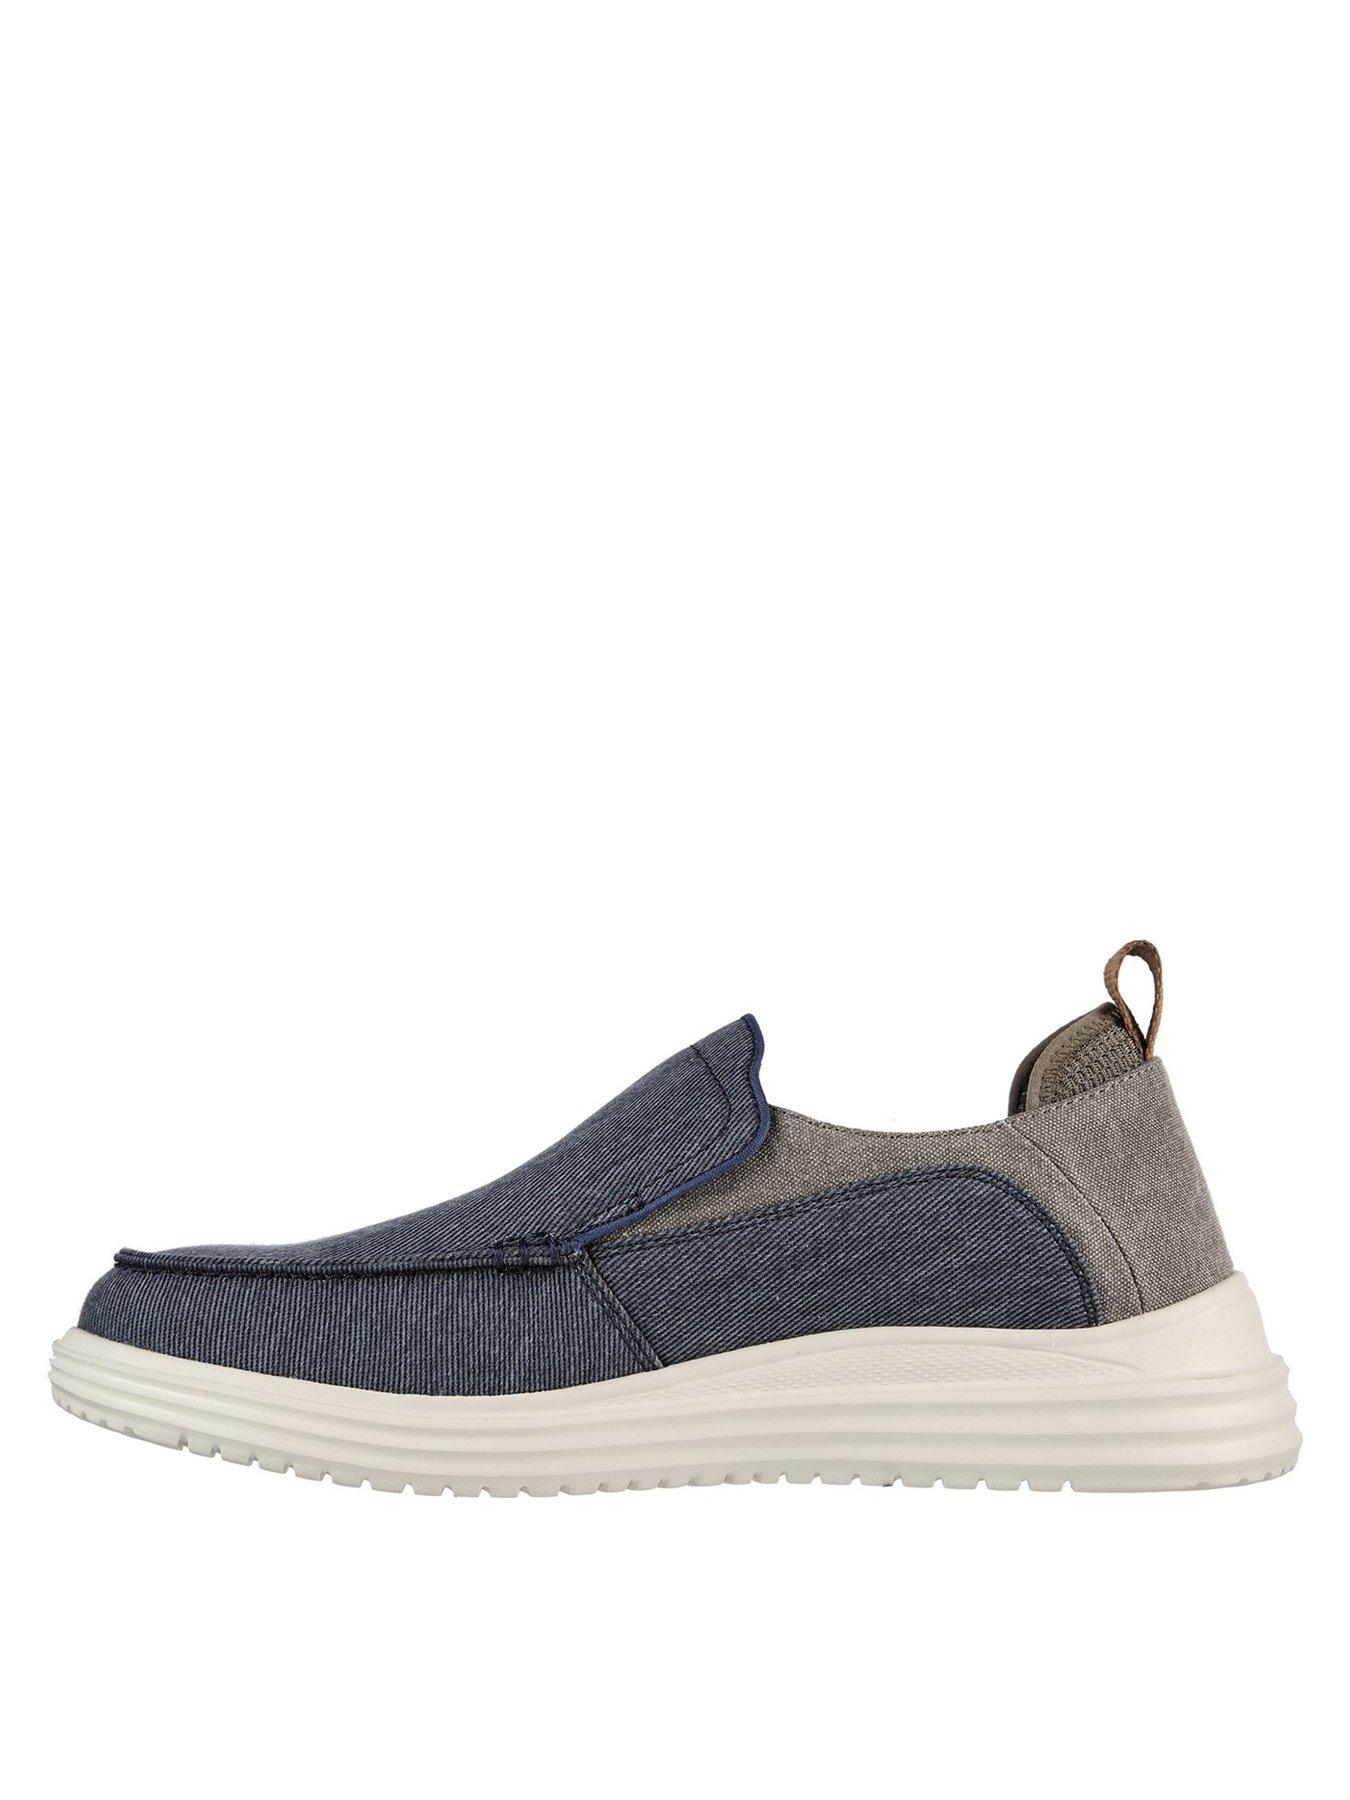 Skechers 204472 - Proven - Evers Casual - Navy/Brown | very.co.uk